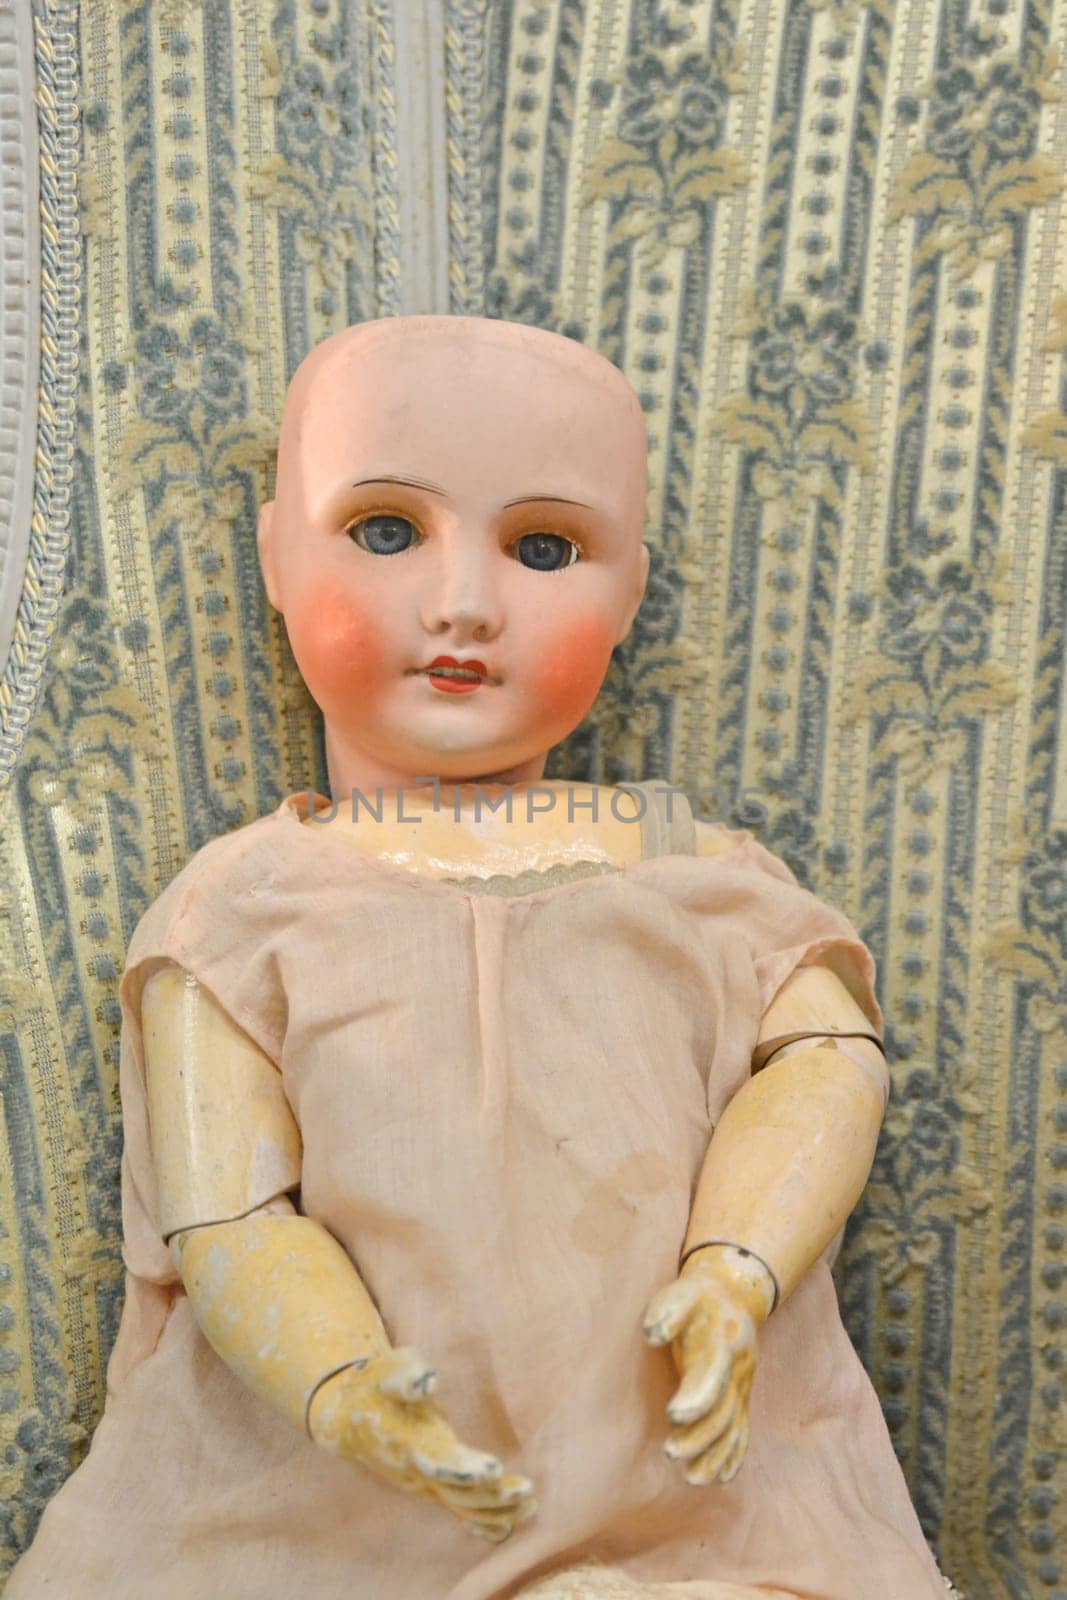 Old french doll in a flea market